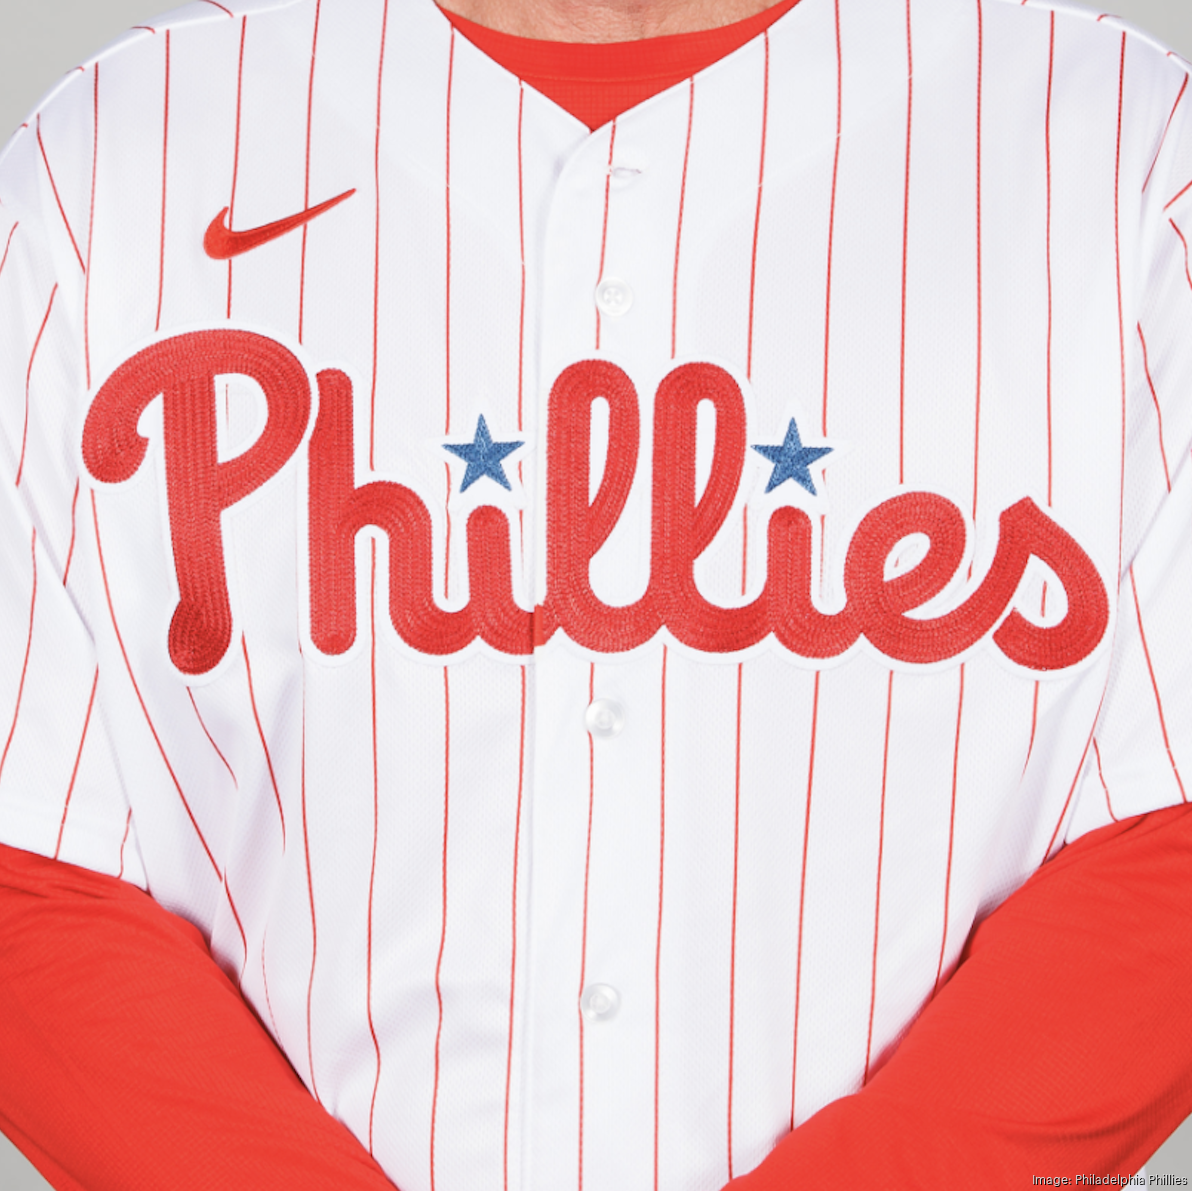 Phillies in talks to land big-money jersey sponsorship by Opening